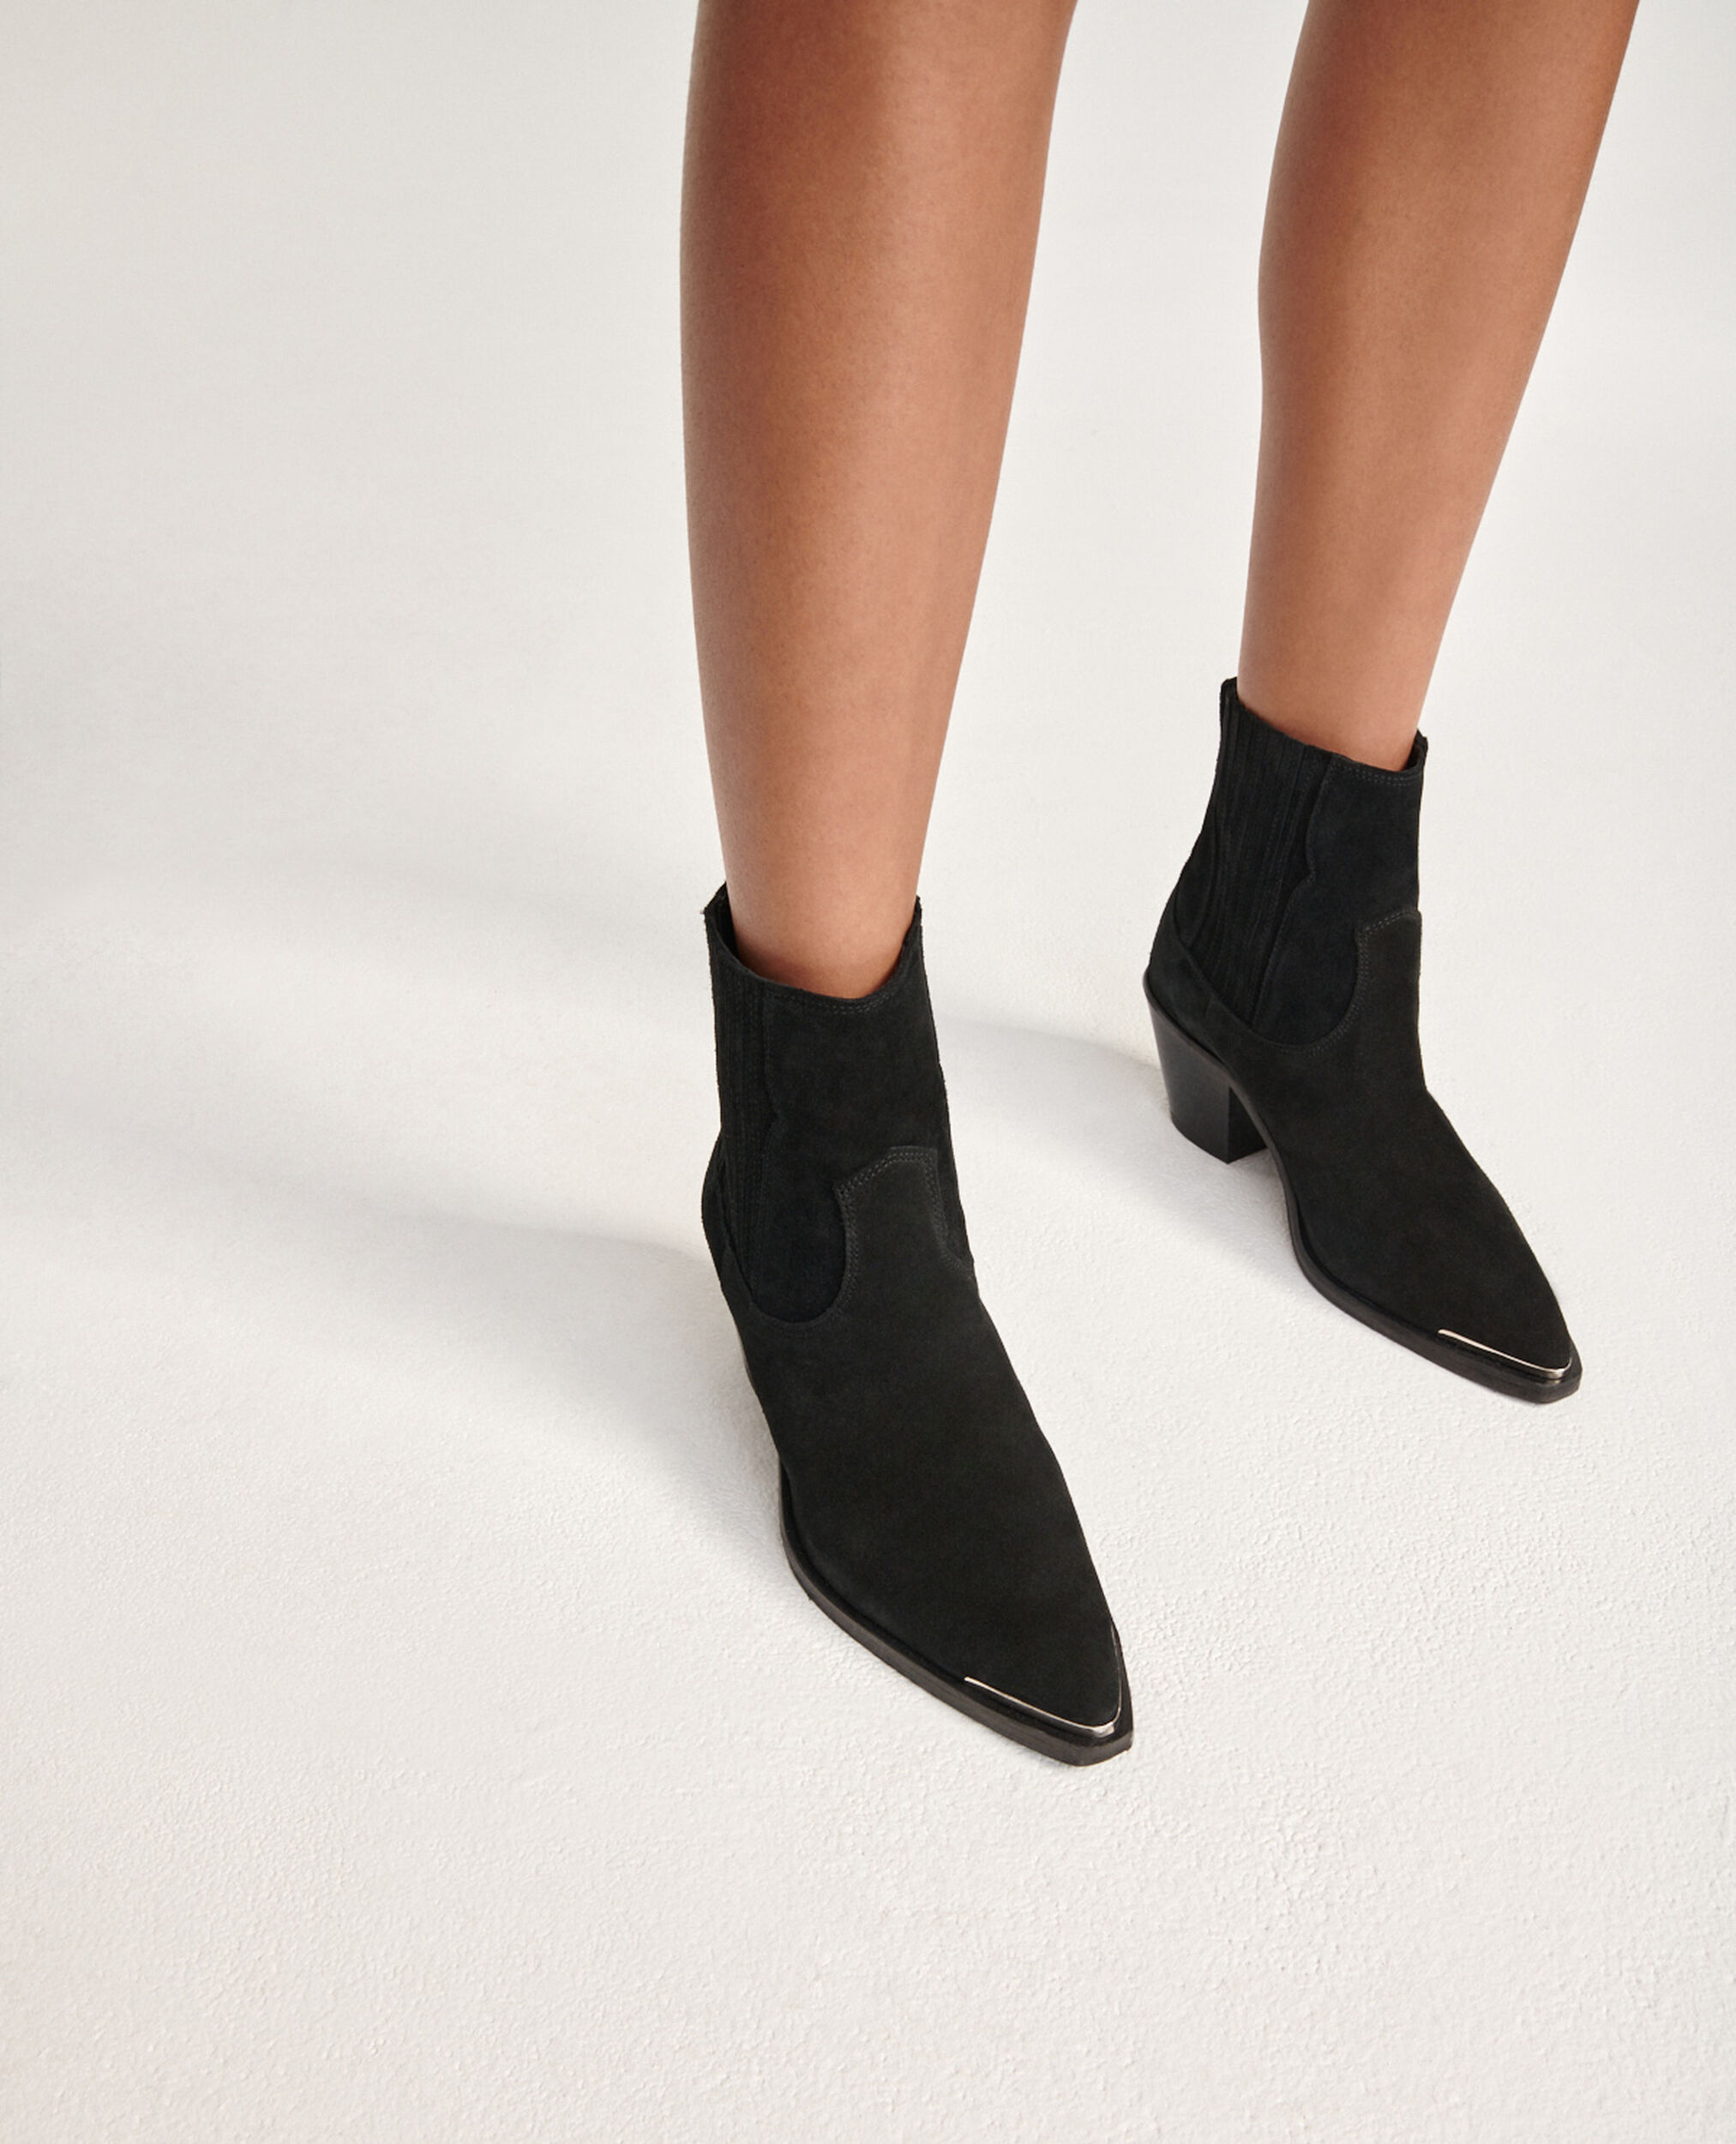 Western-style black suede ankle boots, BLACK, hi-res image number null